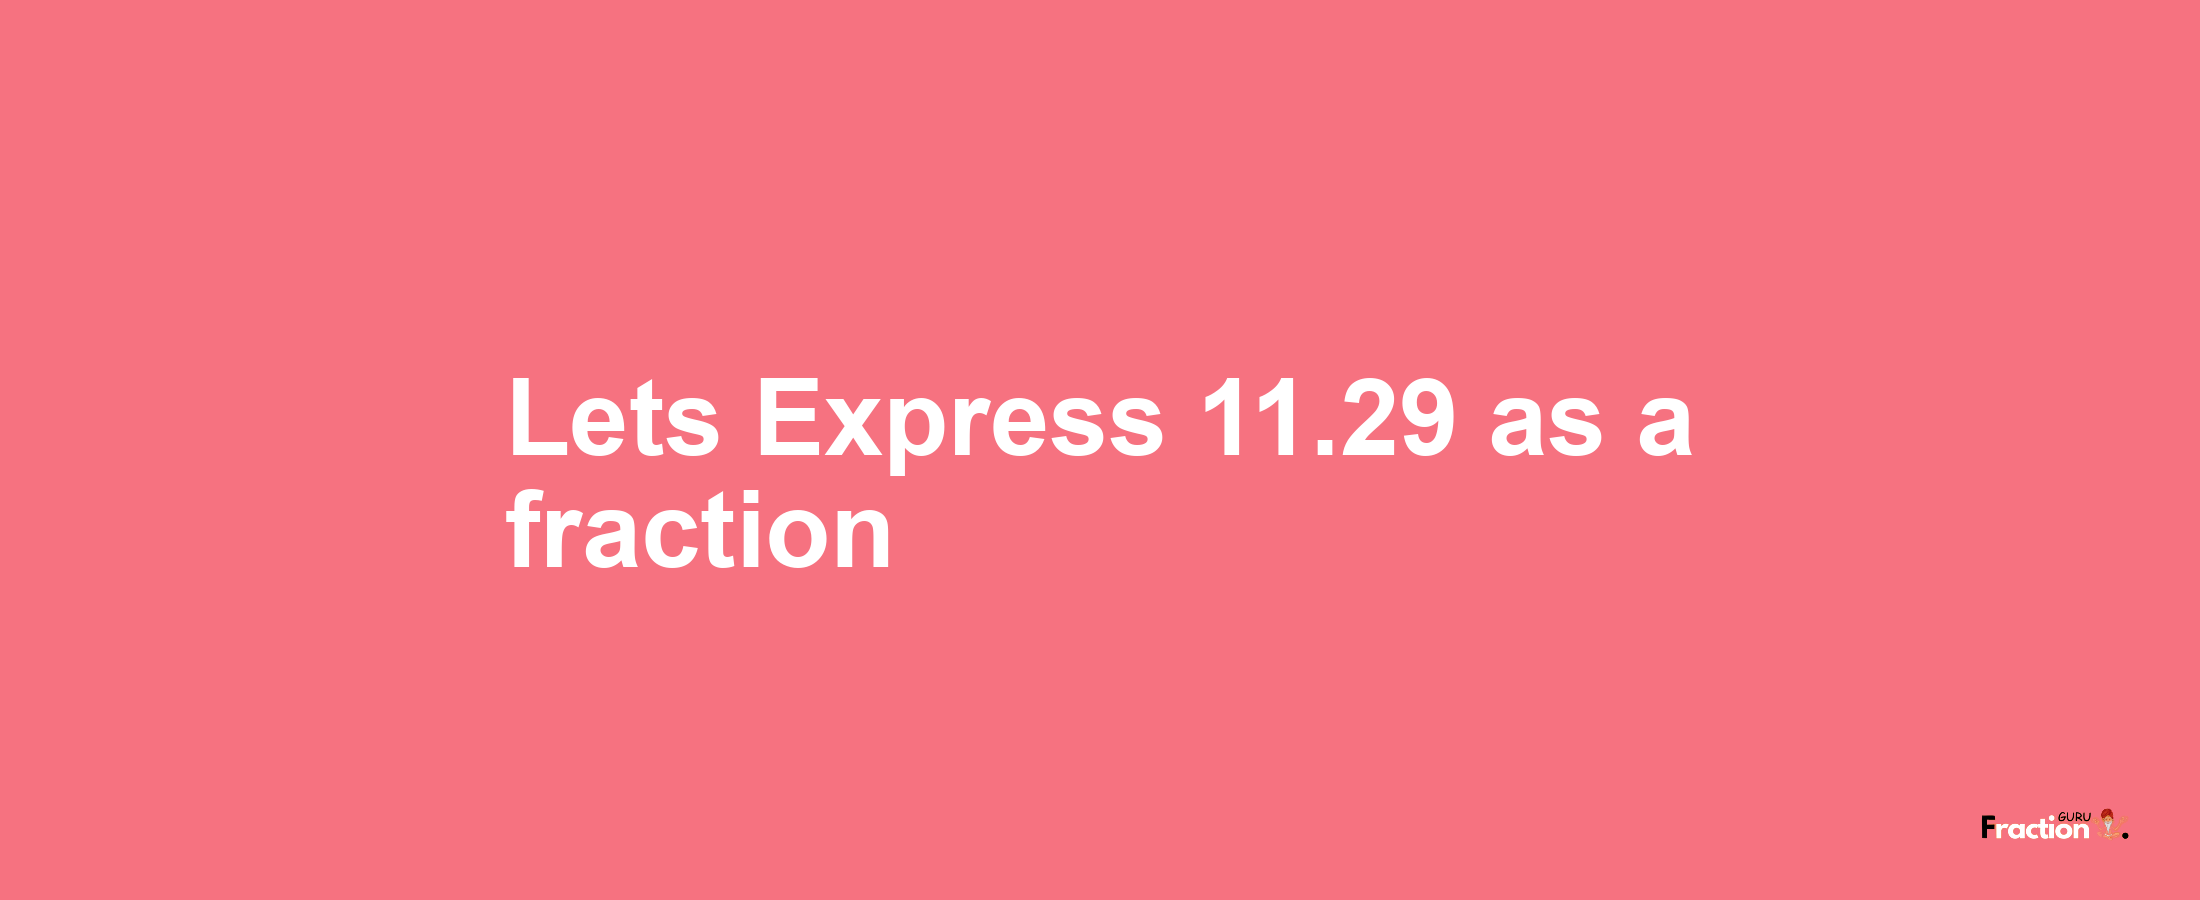 Lets Express 11.29 as afraction